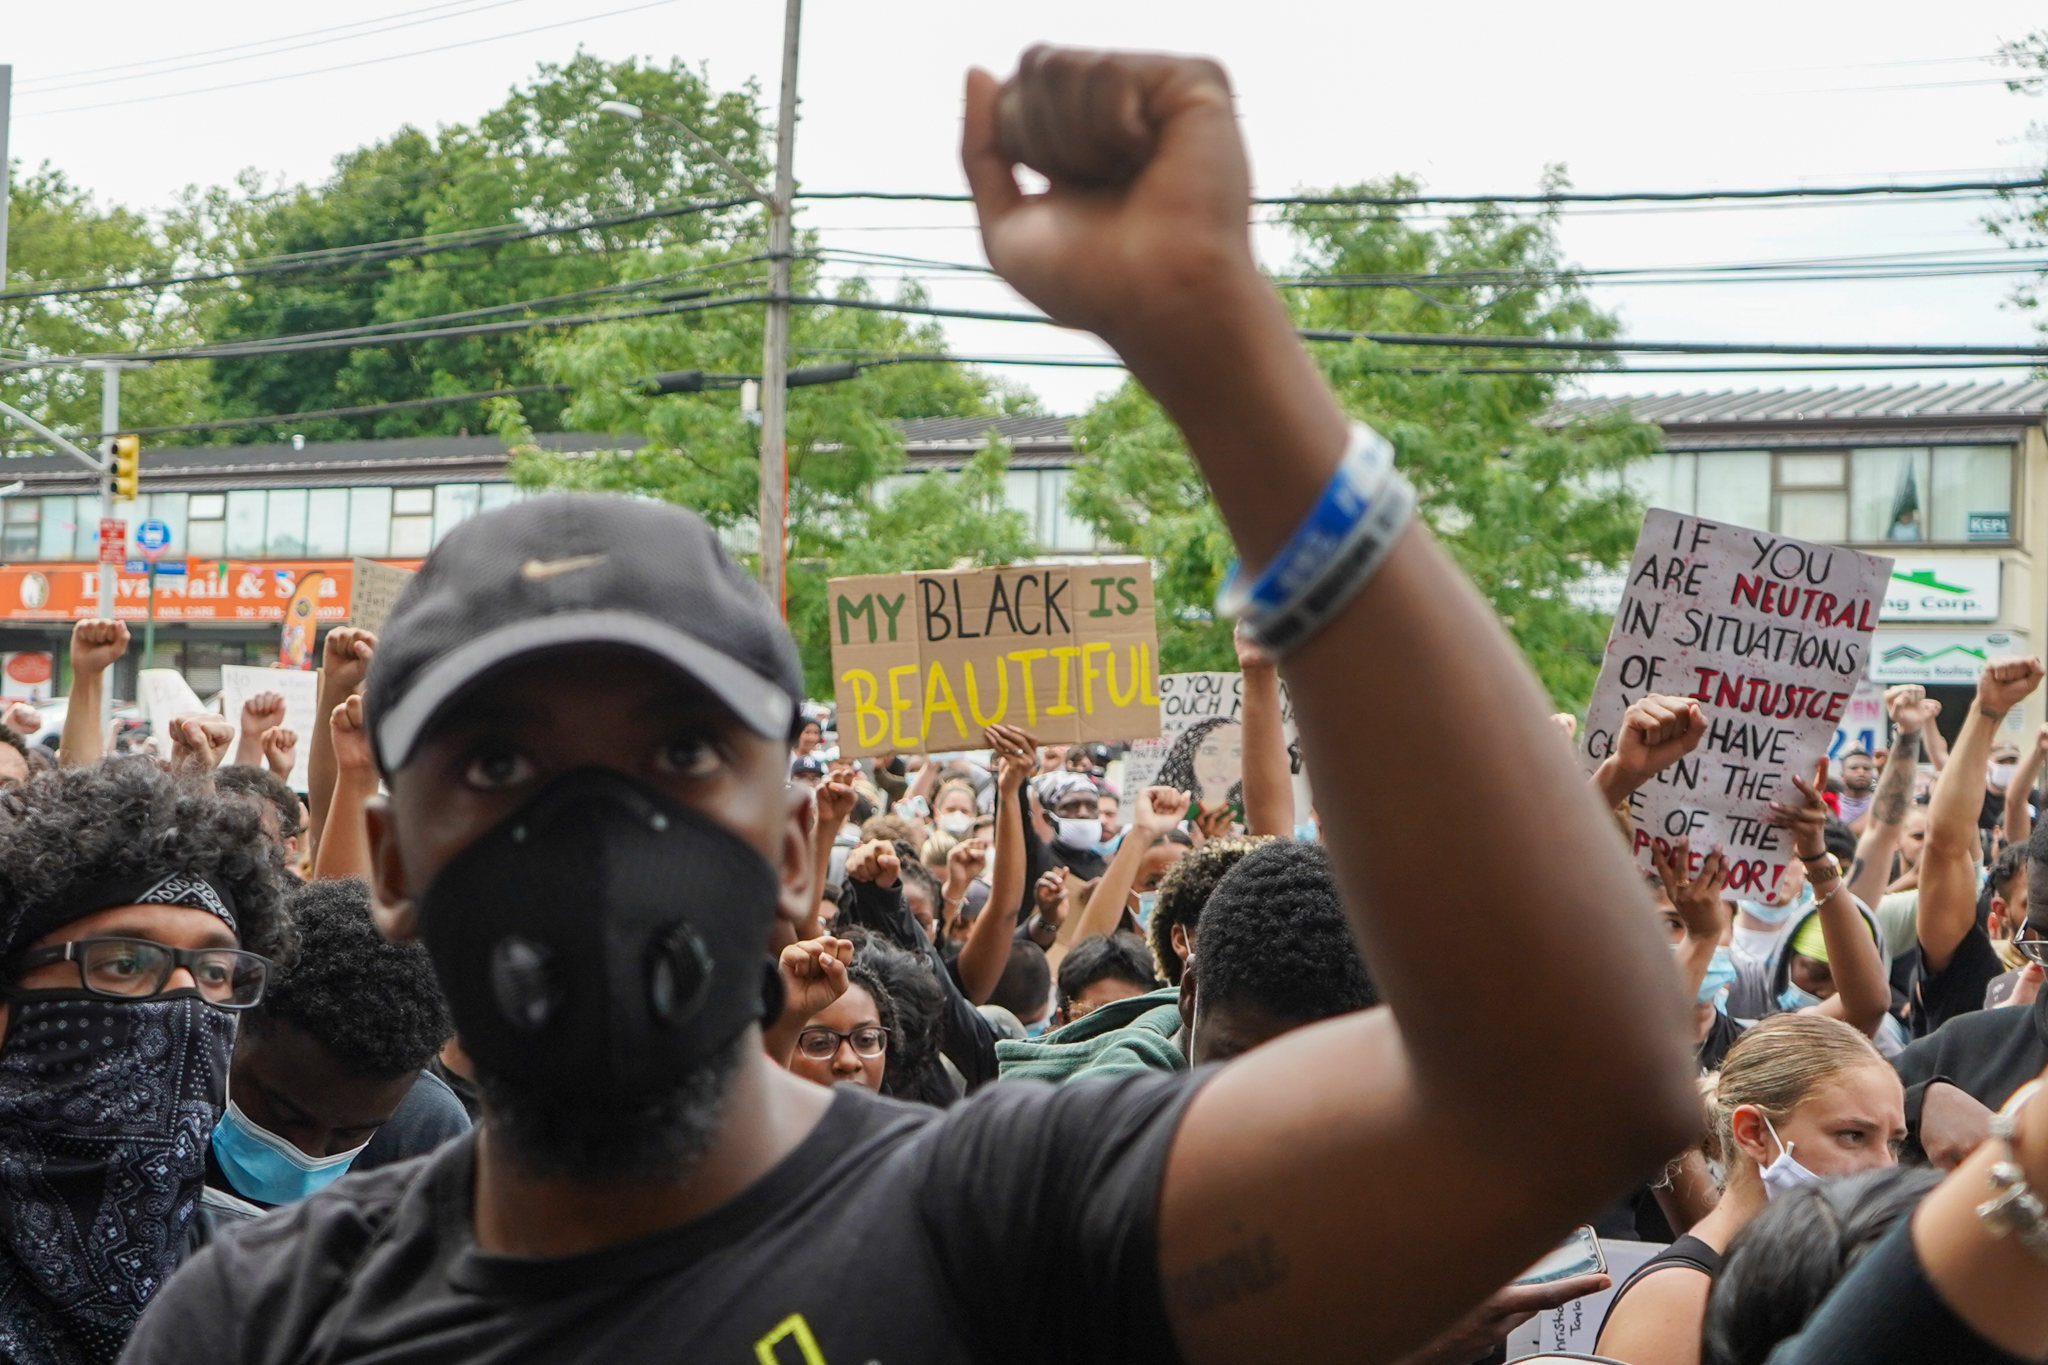 Protesters gather at the 122nd Precinct station house in New Dorp on Friday, June 5, 2020. (Staten Island Advance/Alexandra Salmieri)